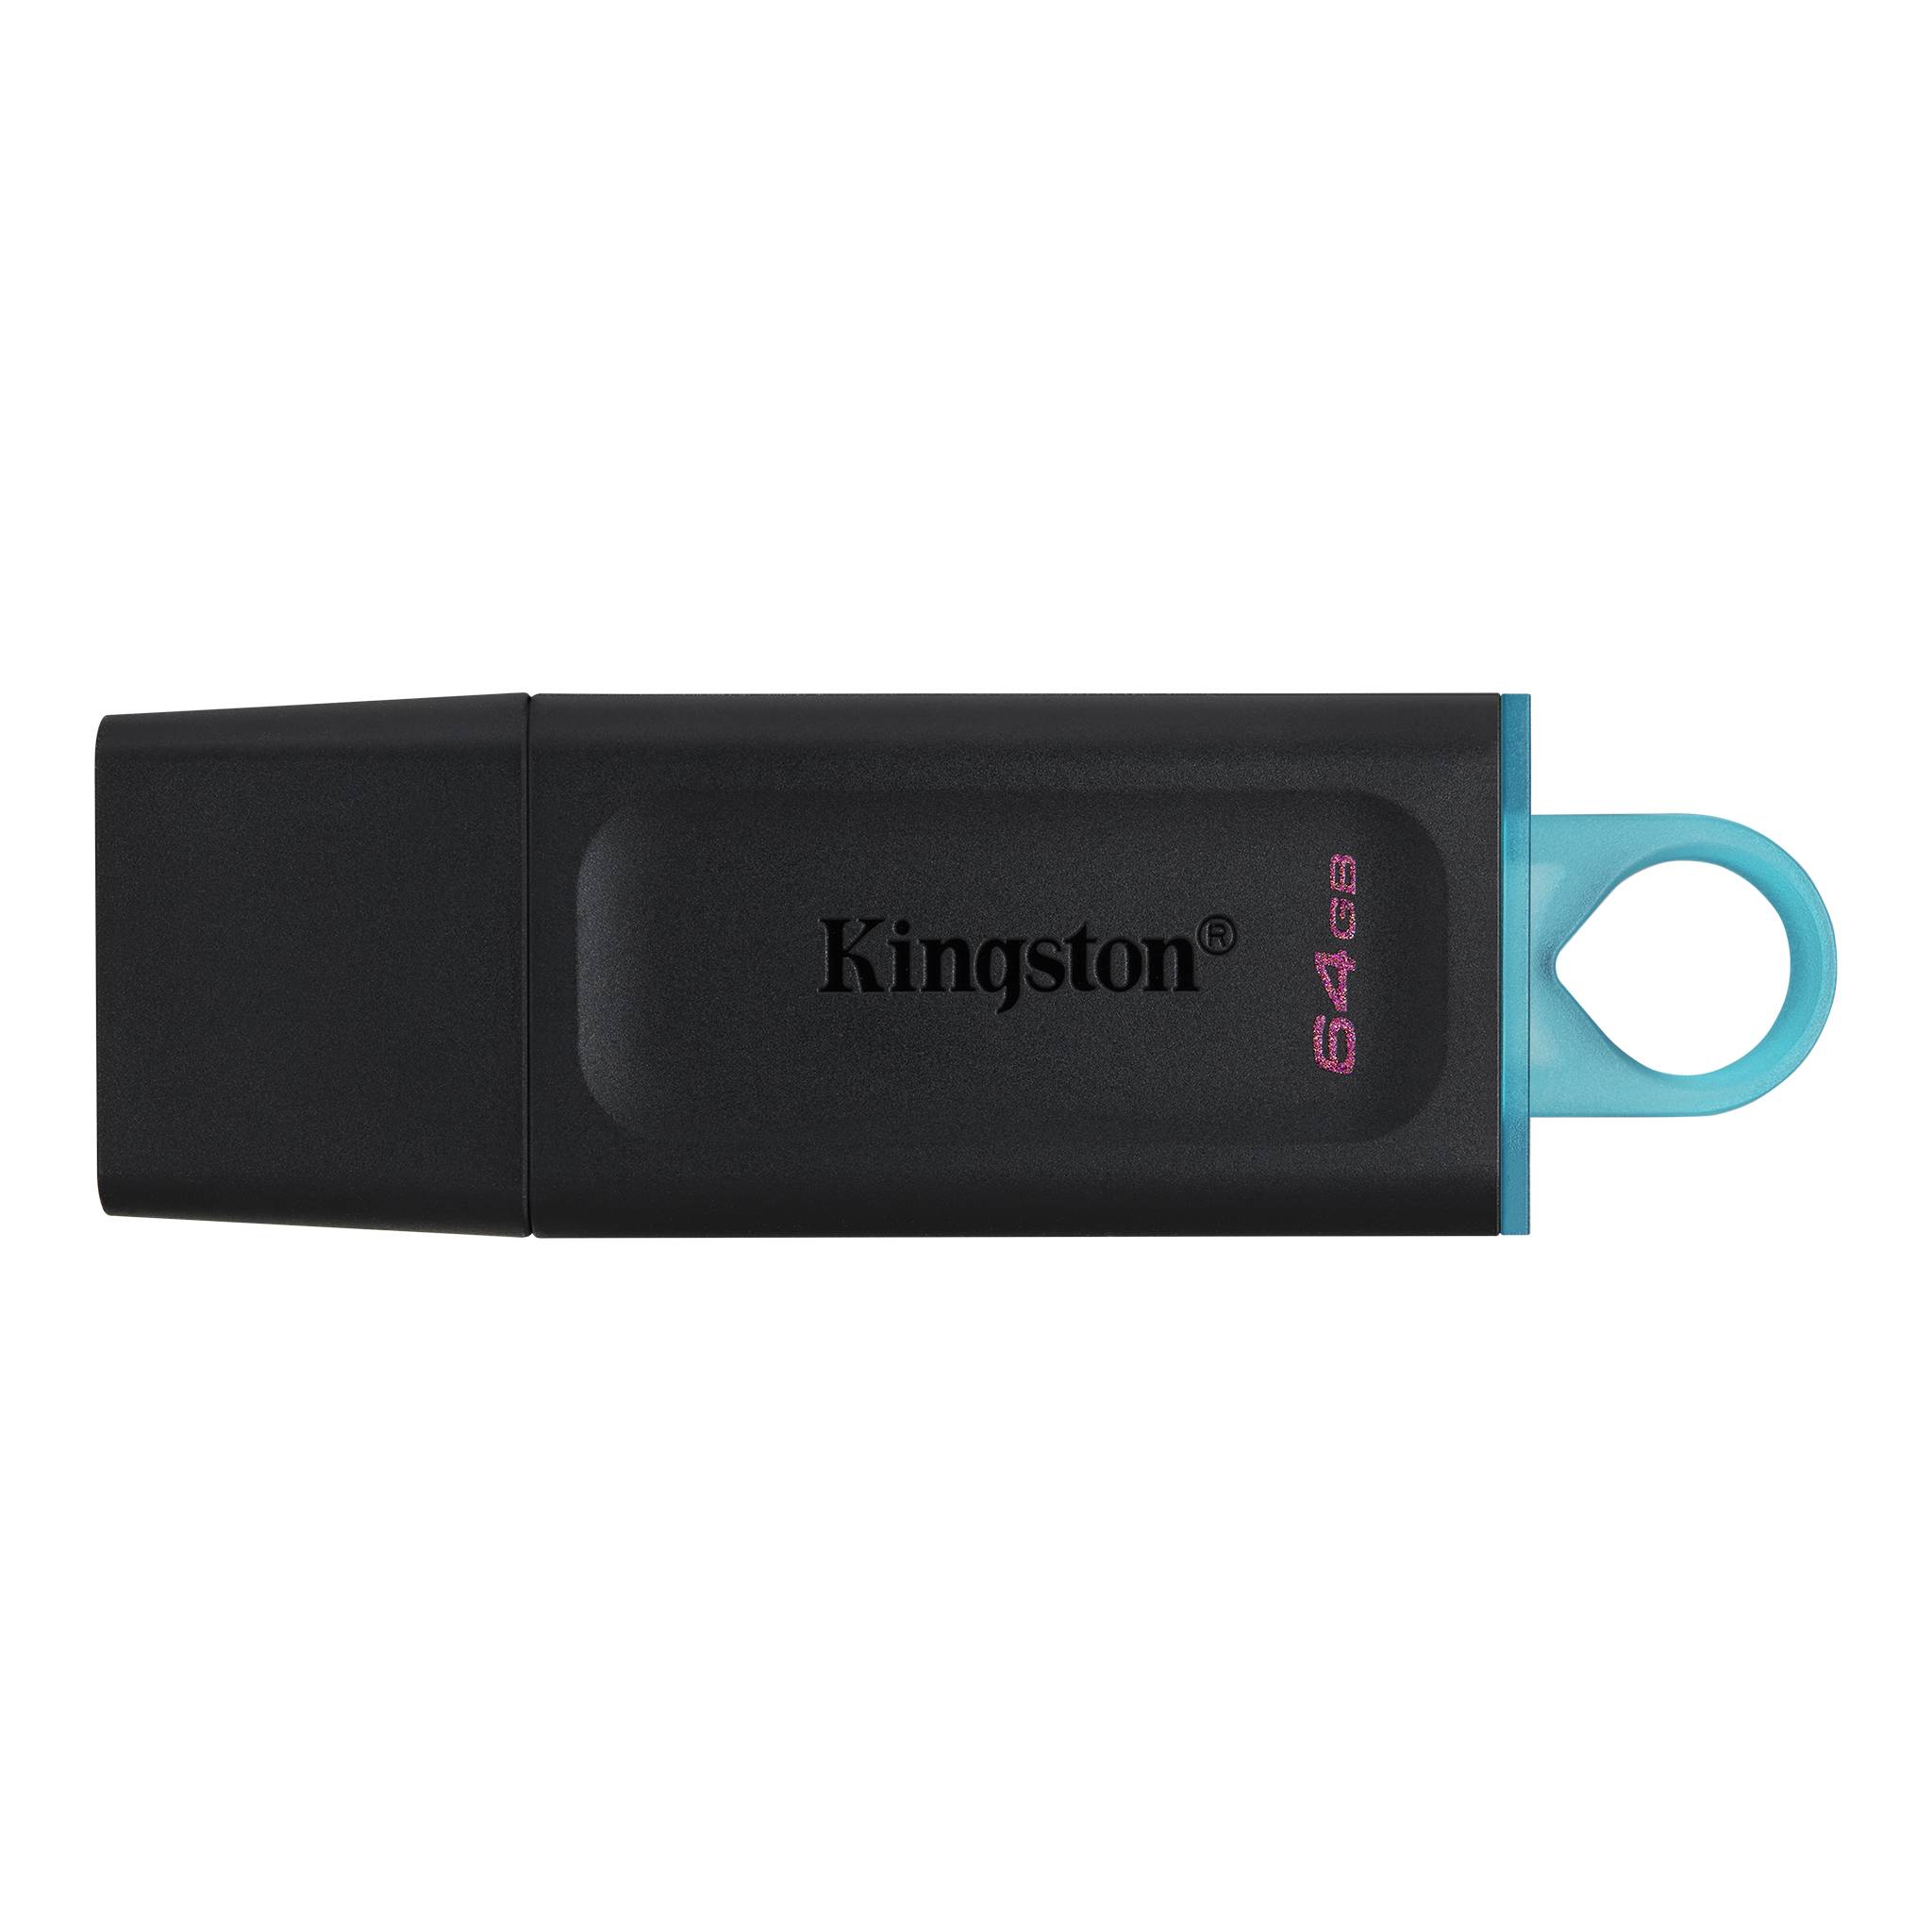 buy Kingston 64GB USB3.0 Flash Drive Memory Stick Thumb Key DataTraveler DT100G3 Retail Pack 5yrs warranty ~USK-DT100G3-64G online from our Melbourne shop